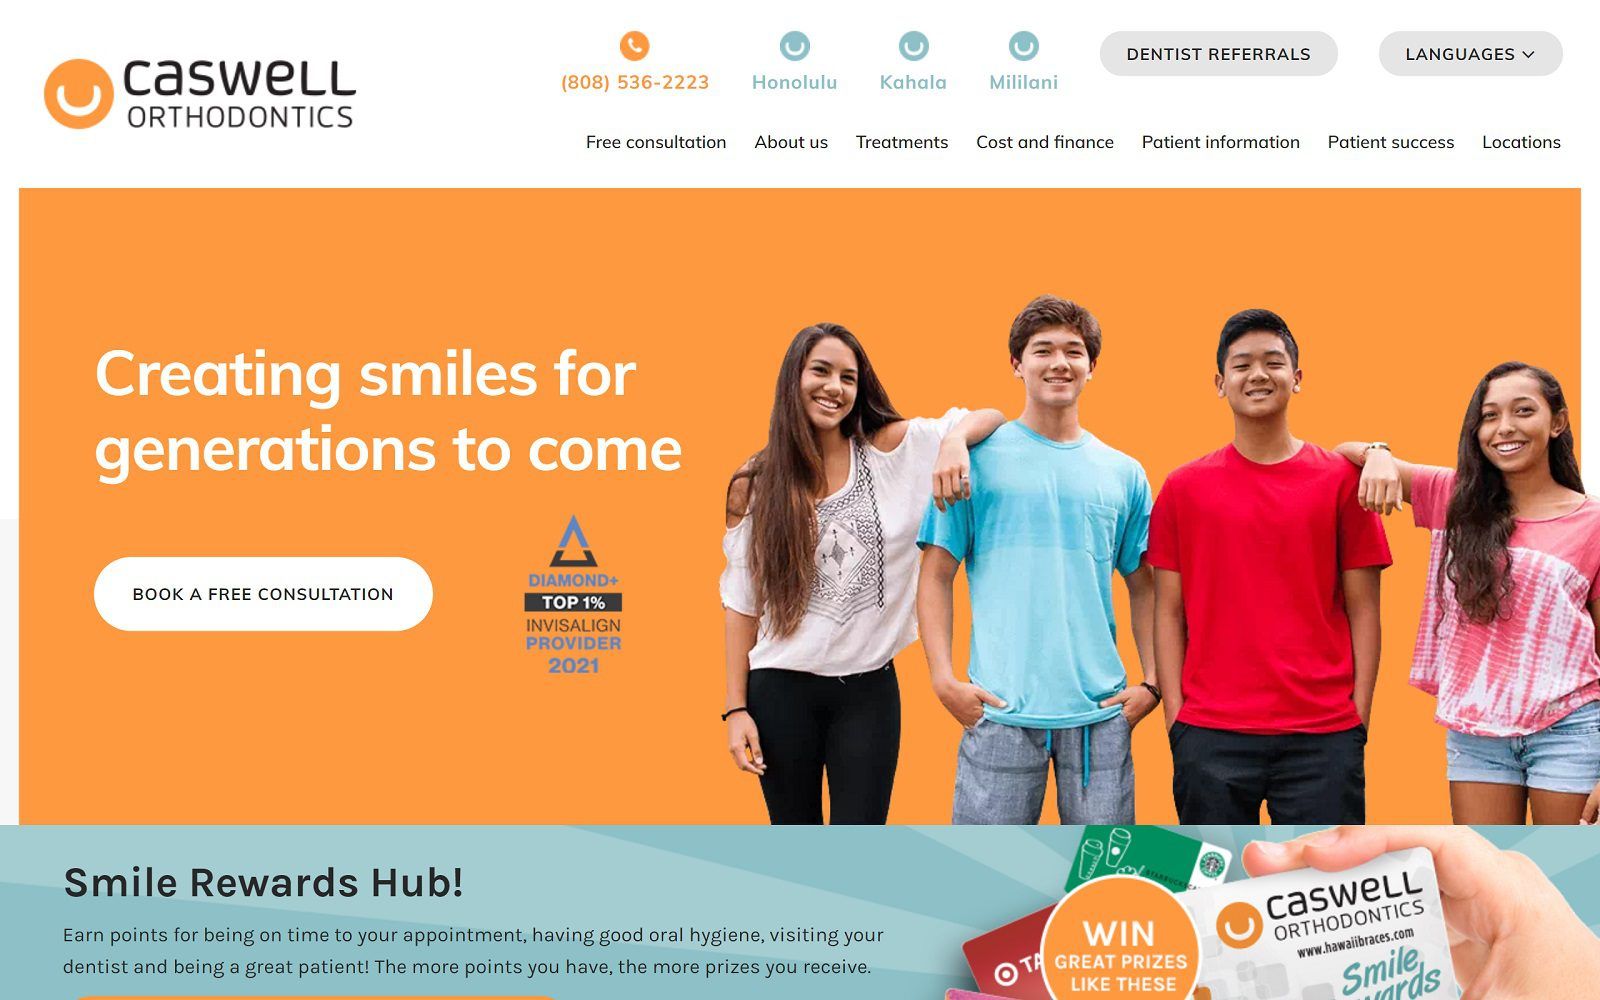 The screenshot of caswell orthodontics dr. Kimi caswell website